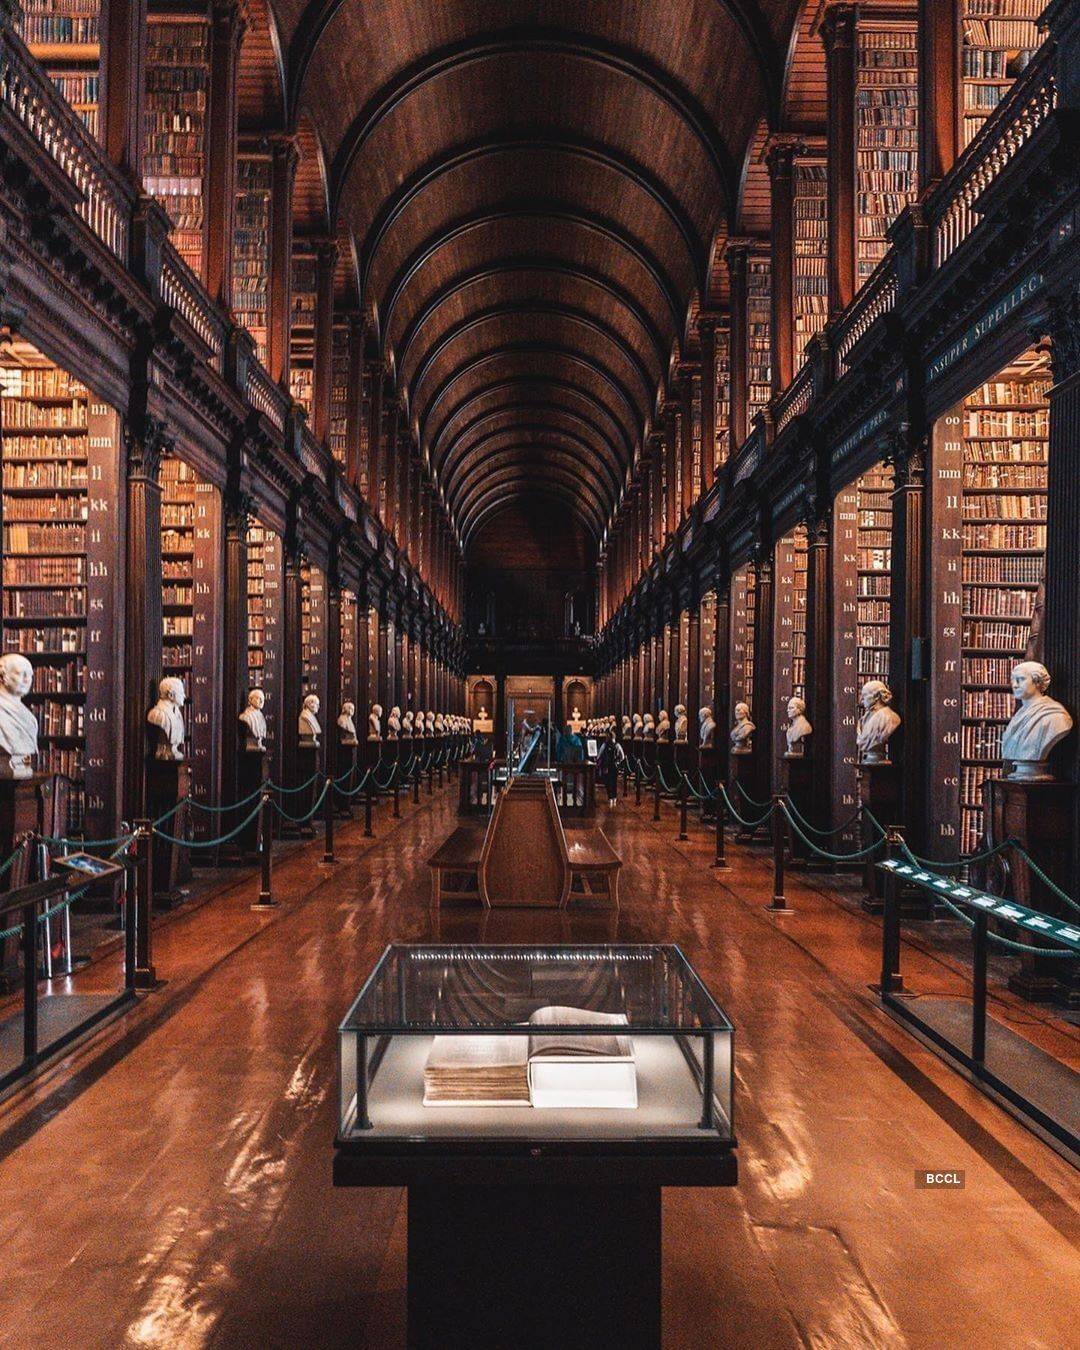 Mesmerising pictures of libraries around the world every book lover must see